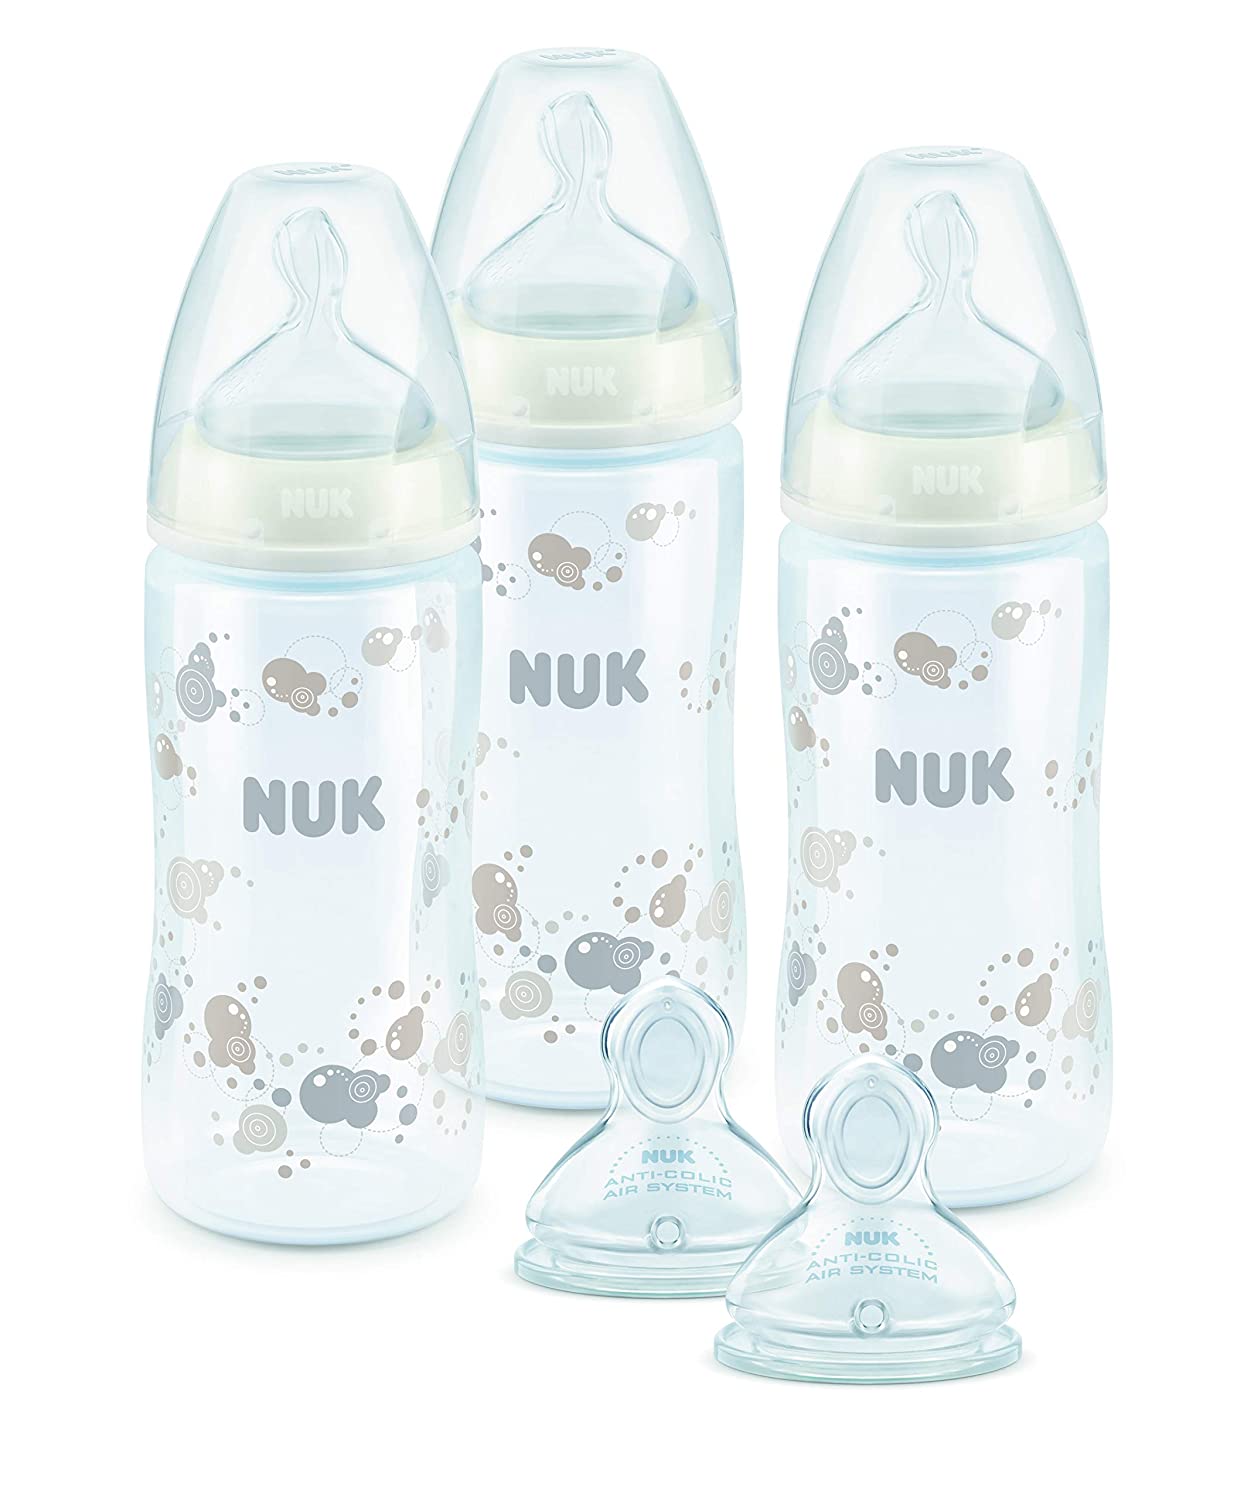 NUK First Choice Plus 3 Plus 2 Set, Value Set with PP Baby Bottles and Two Replacement Teats, BPA Free, 0-6 Months